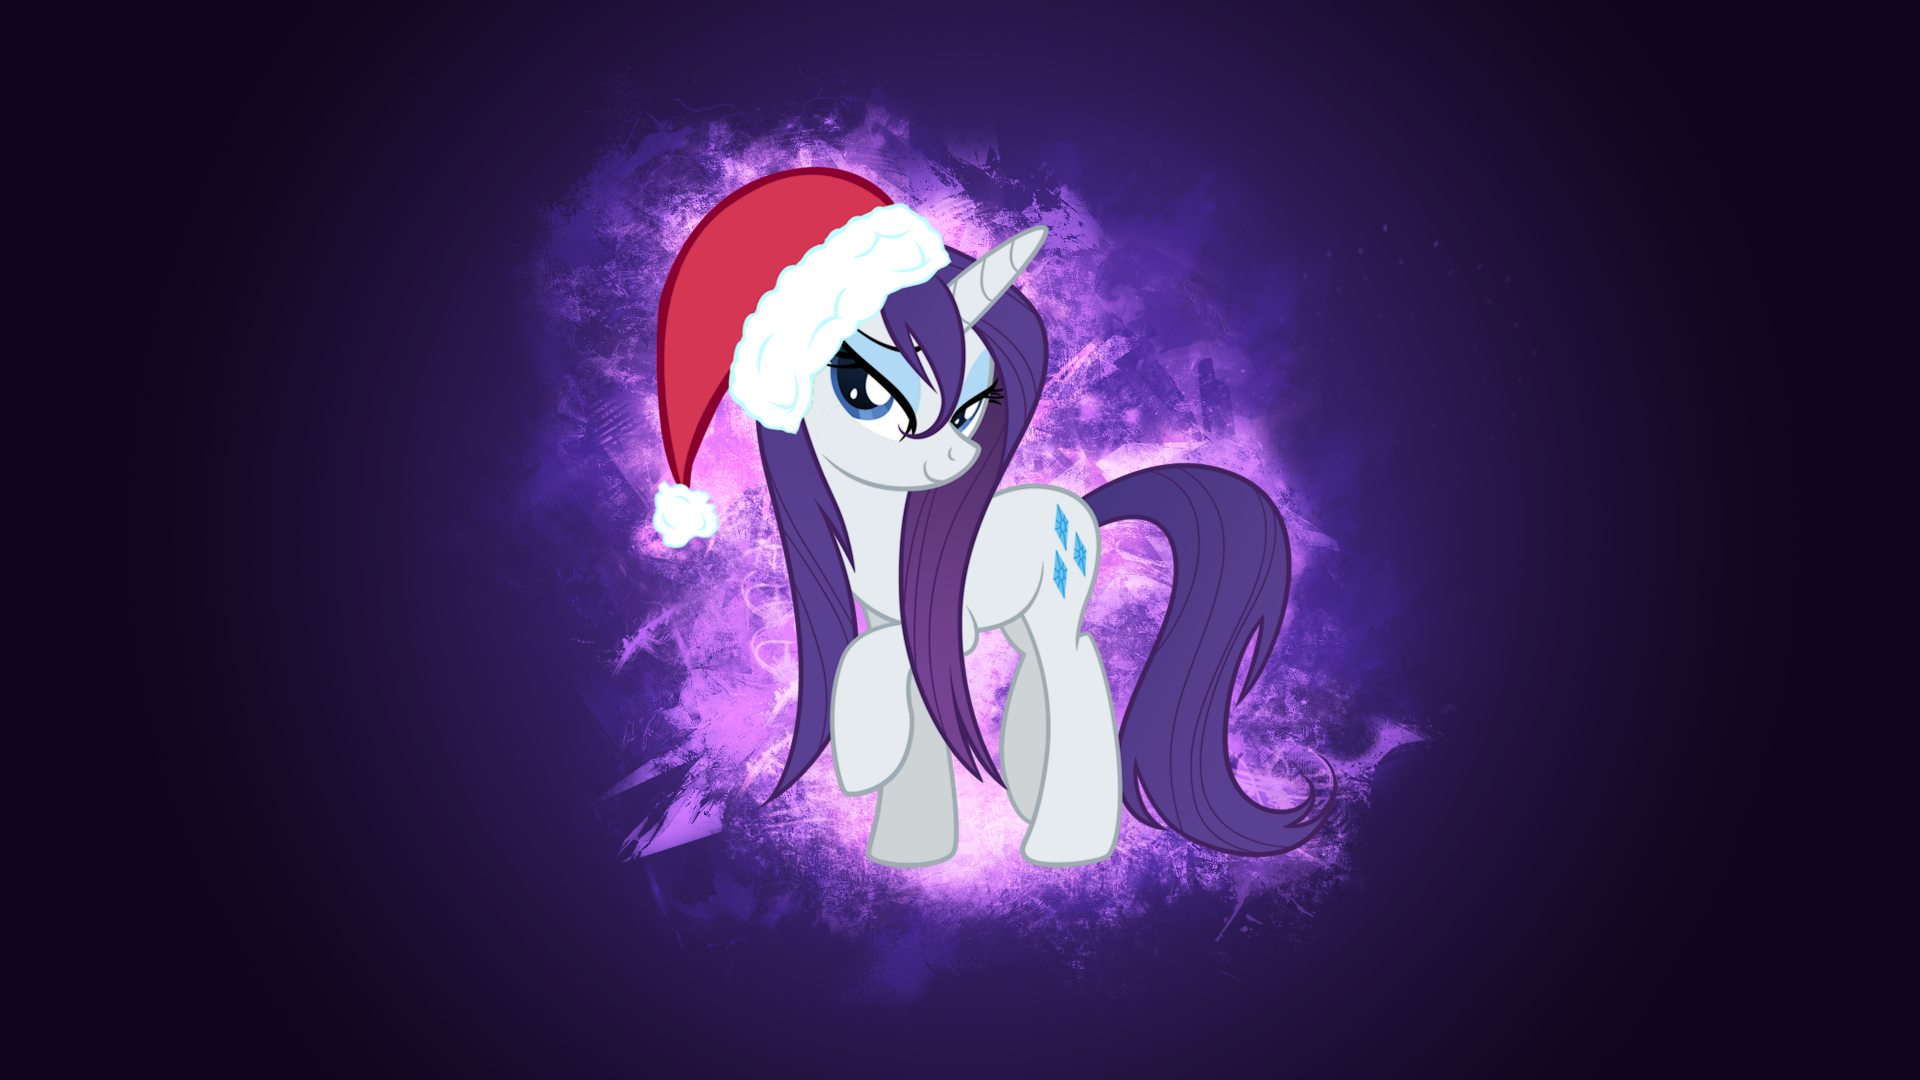 Wallpaper - Christmas Time Rarity by Equestria-Prevails and snajperpl